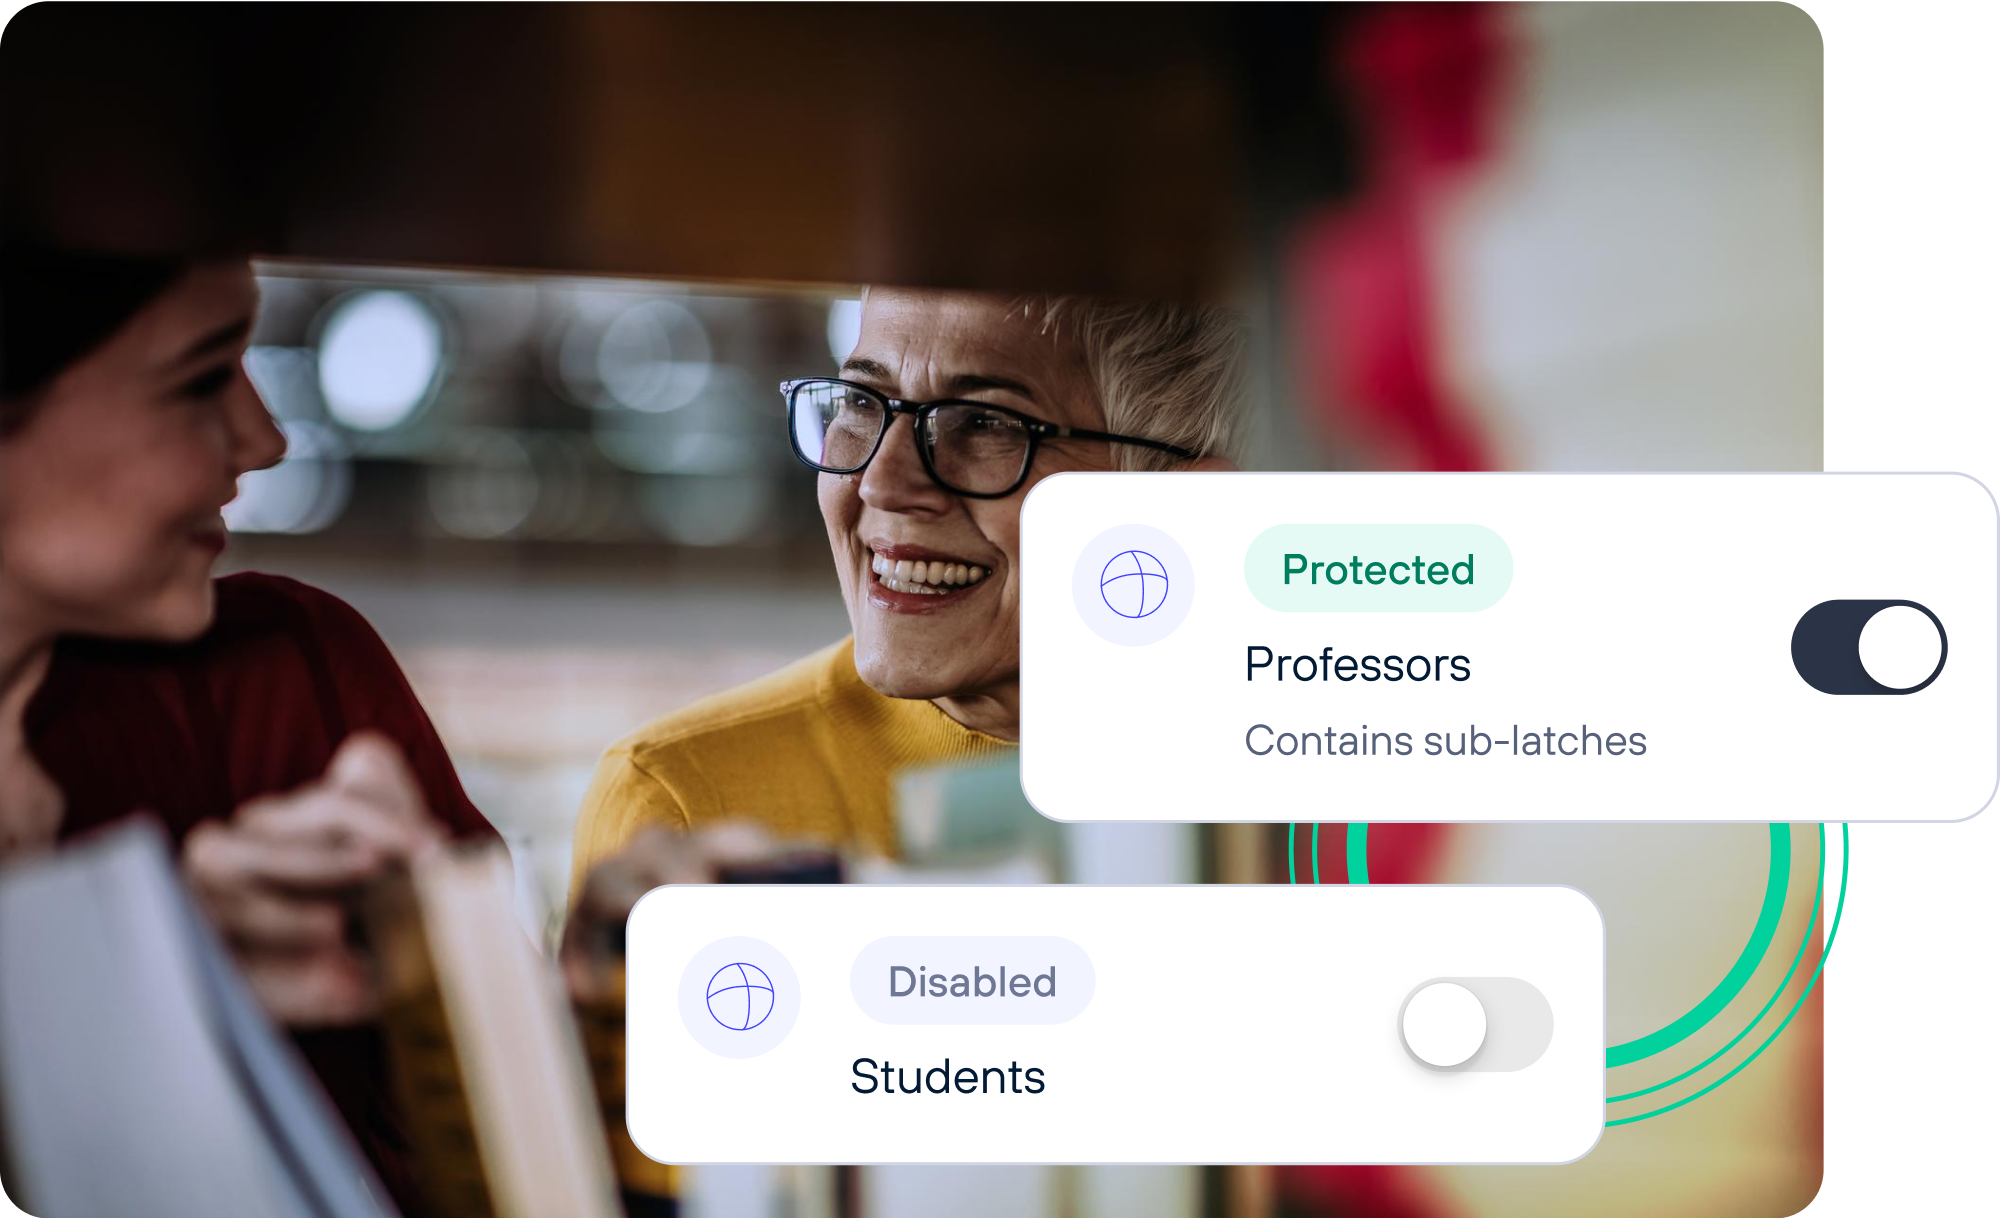 Manage roles and access on your education platform